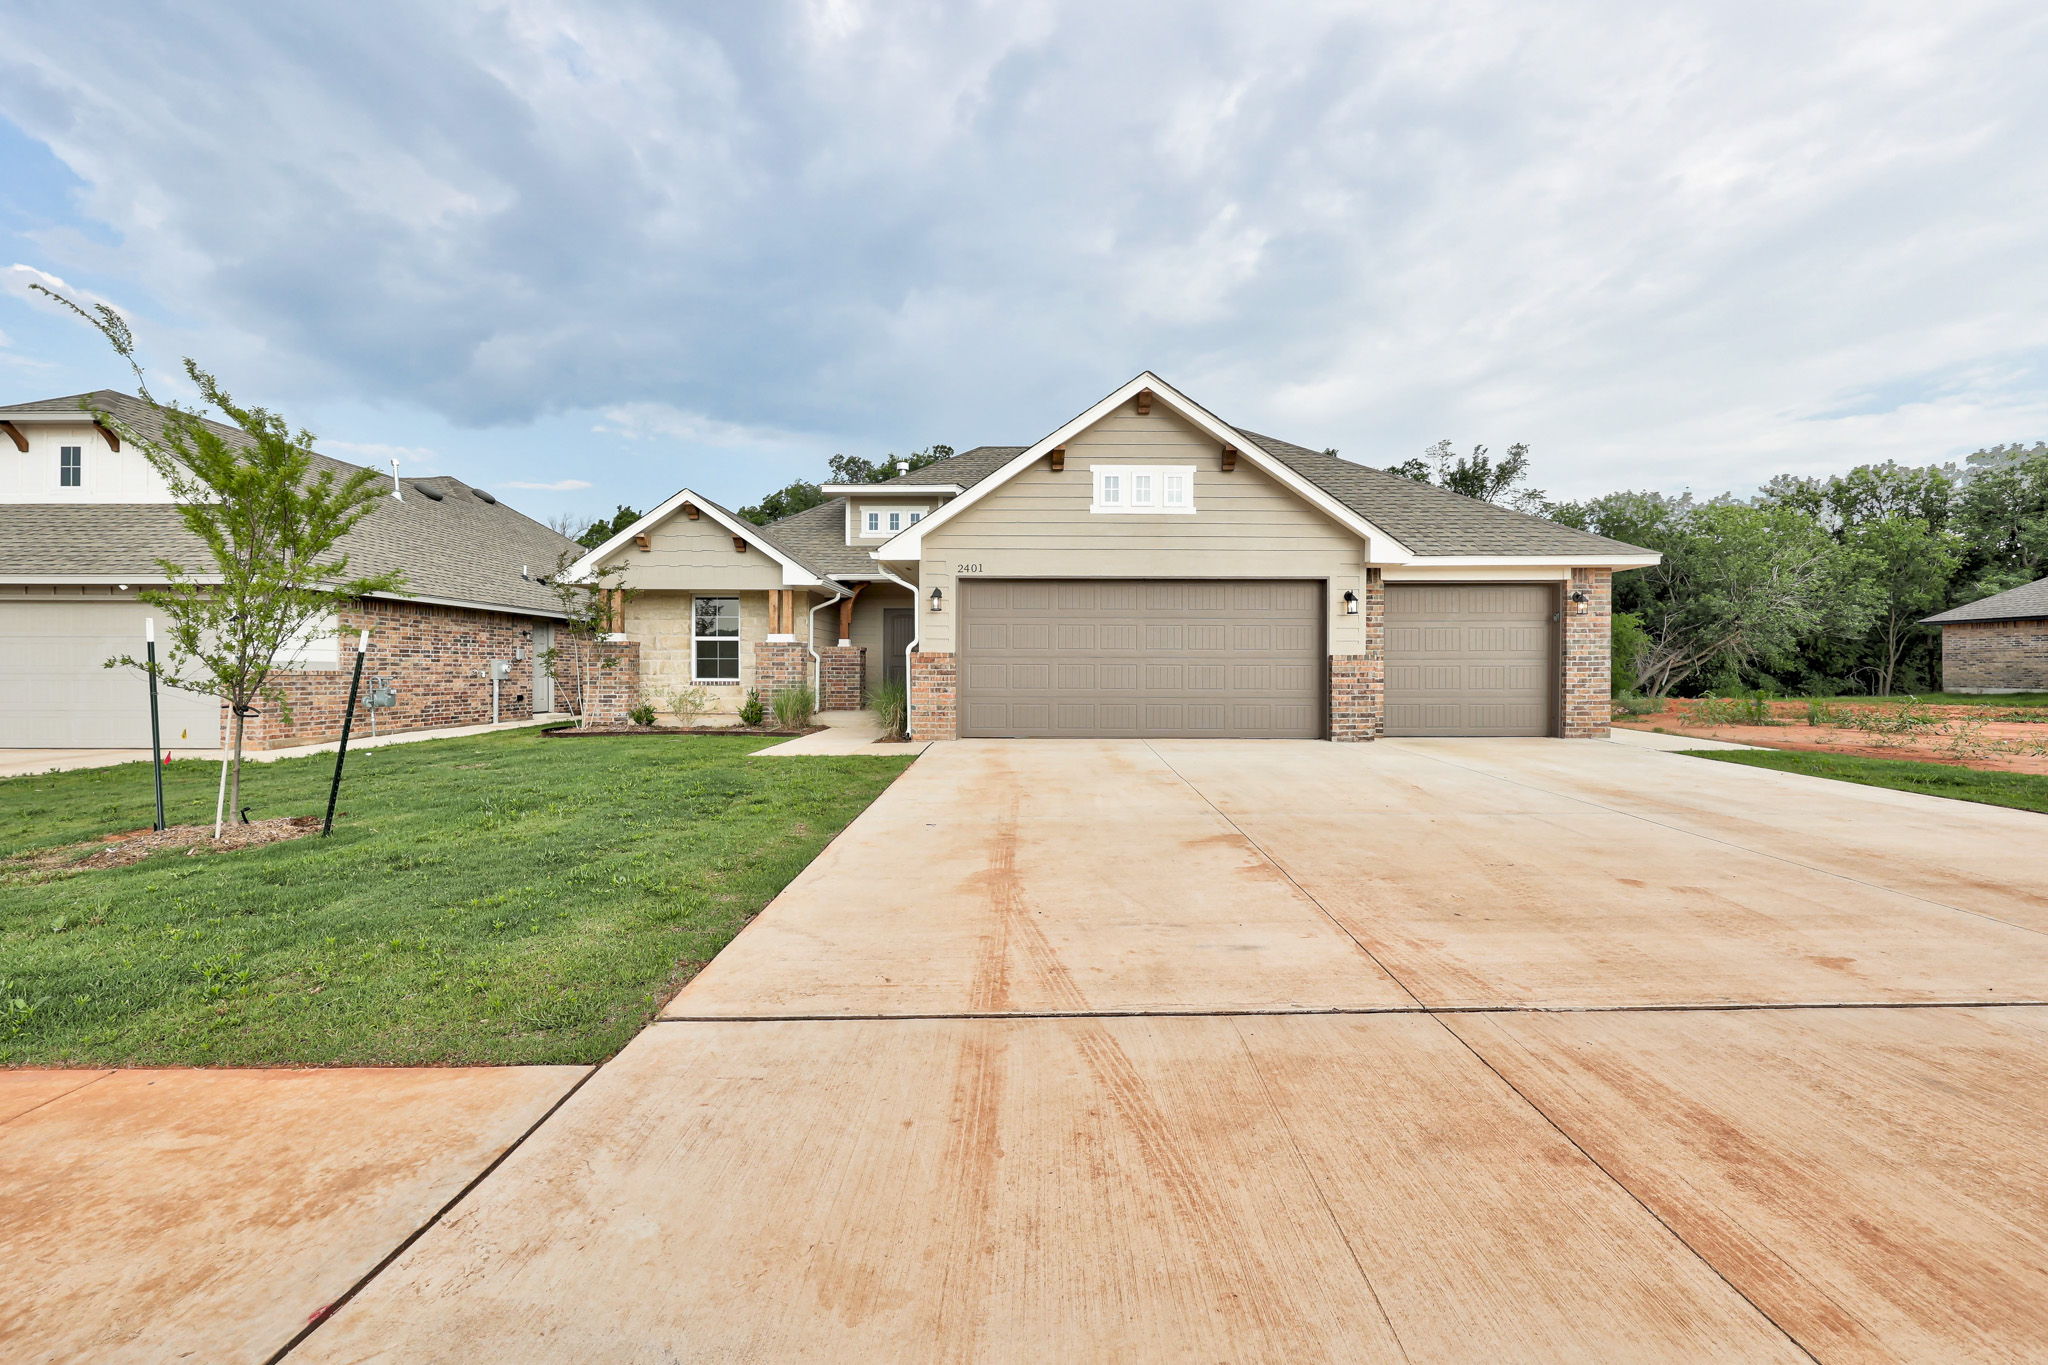 2401 Creekview Dr, Moore, Oklahoma 73160, 4 Bedrooms Bedrooms, ,2 BathroomsBathrooms,House,For Sale,Creekview Dr,1290